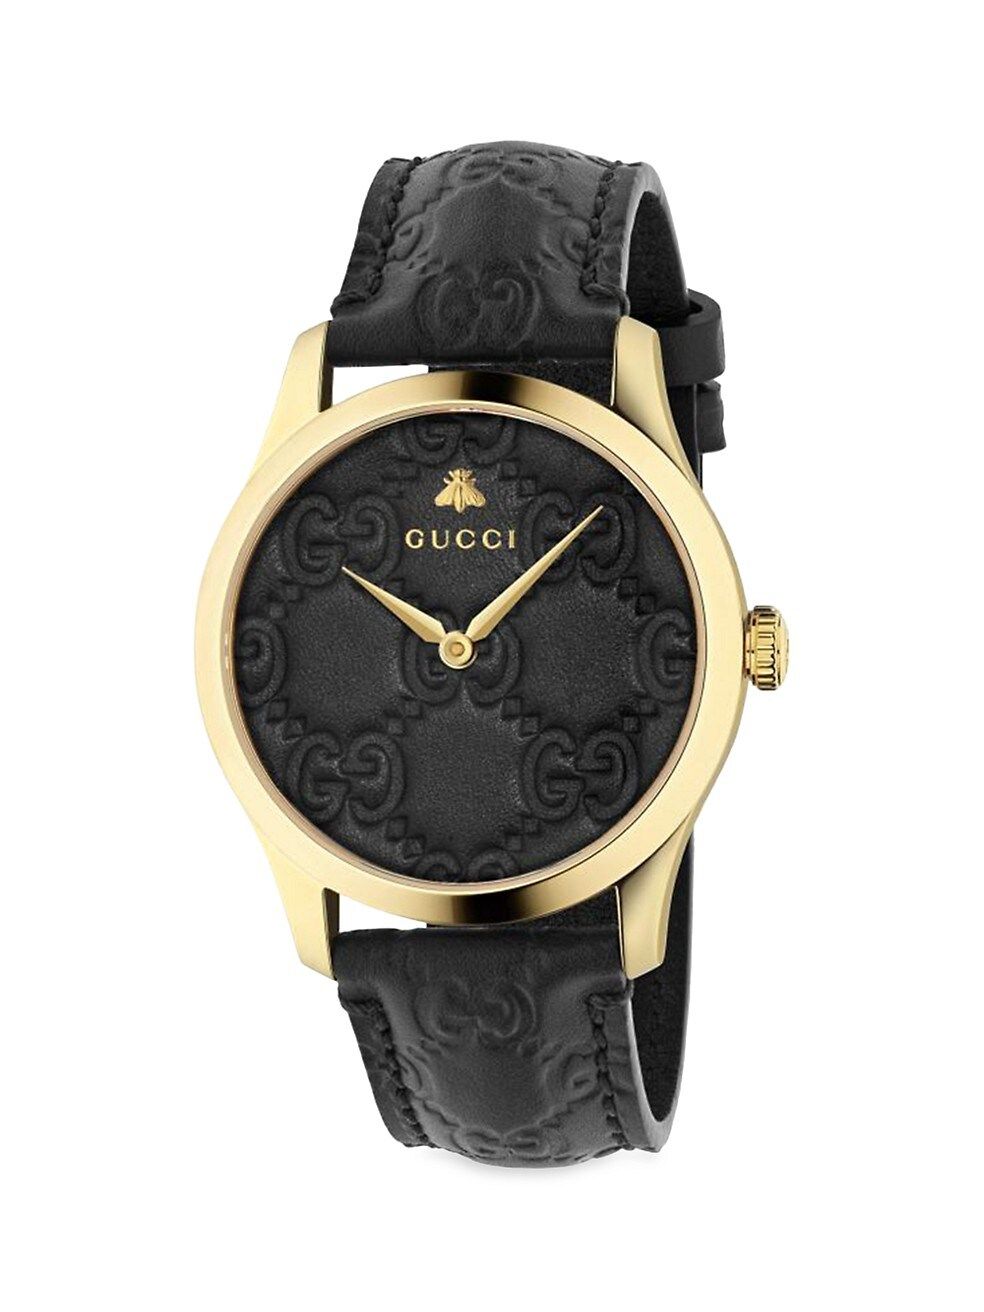 Gucci G-Timeless Goldtone Stainless Steel Leather Strap Watch | Saks Fifth Avenue